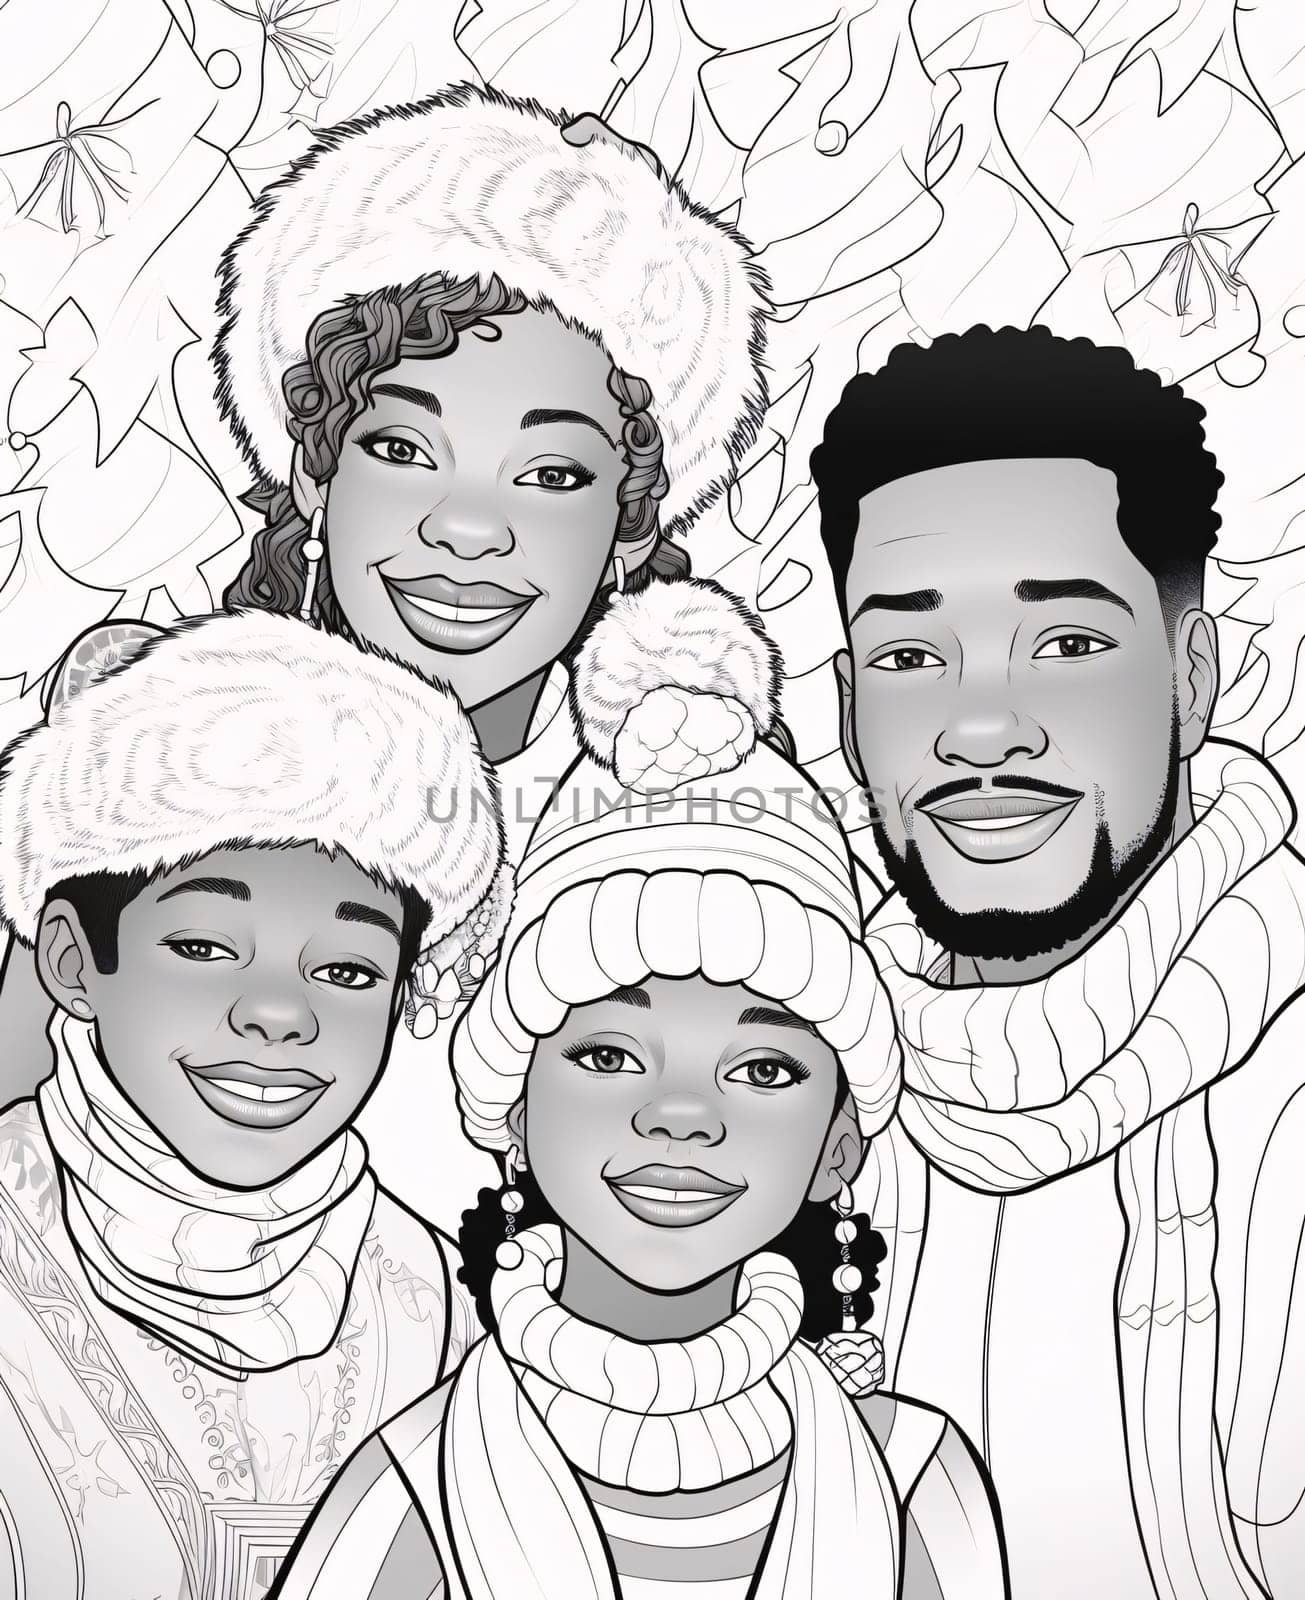 Black and White coloring page, black family wearing hats and scarves. Celebrating Black History Month! by ThemesS